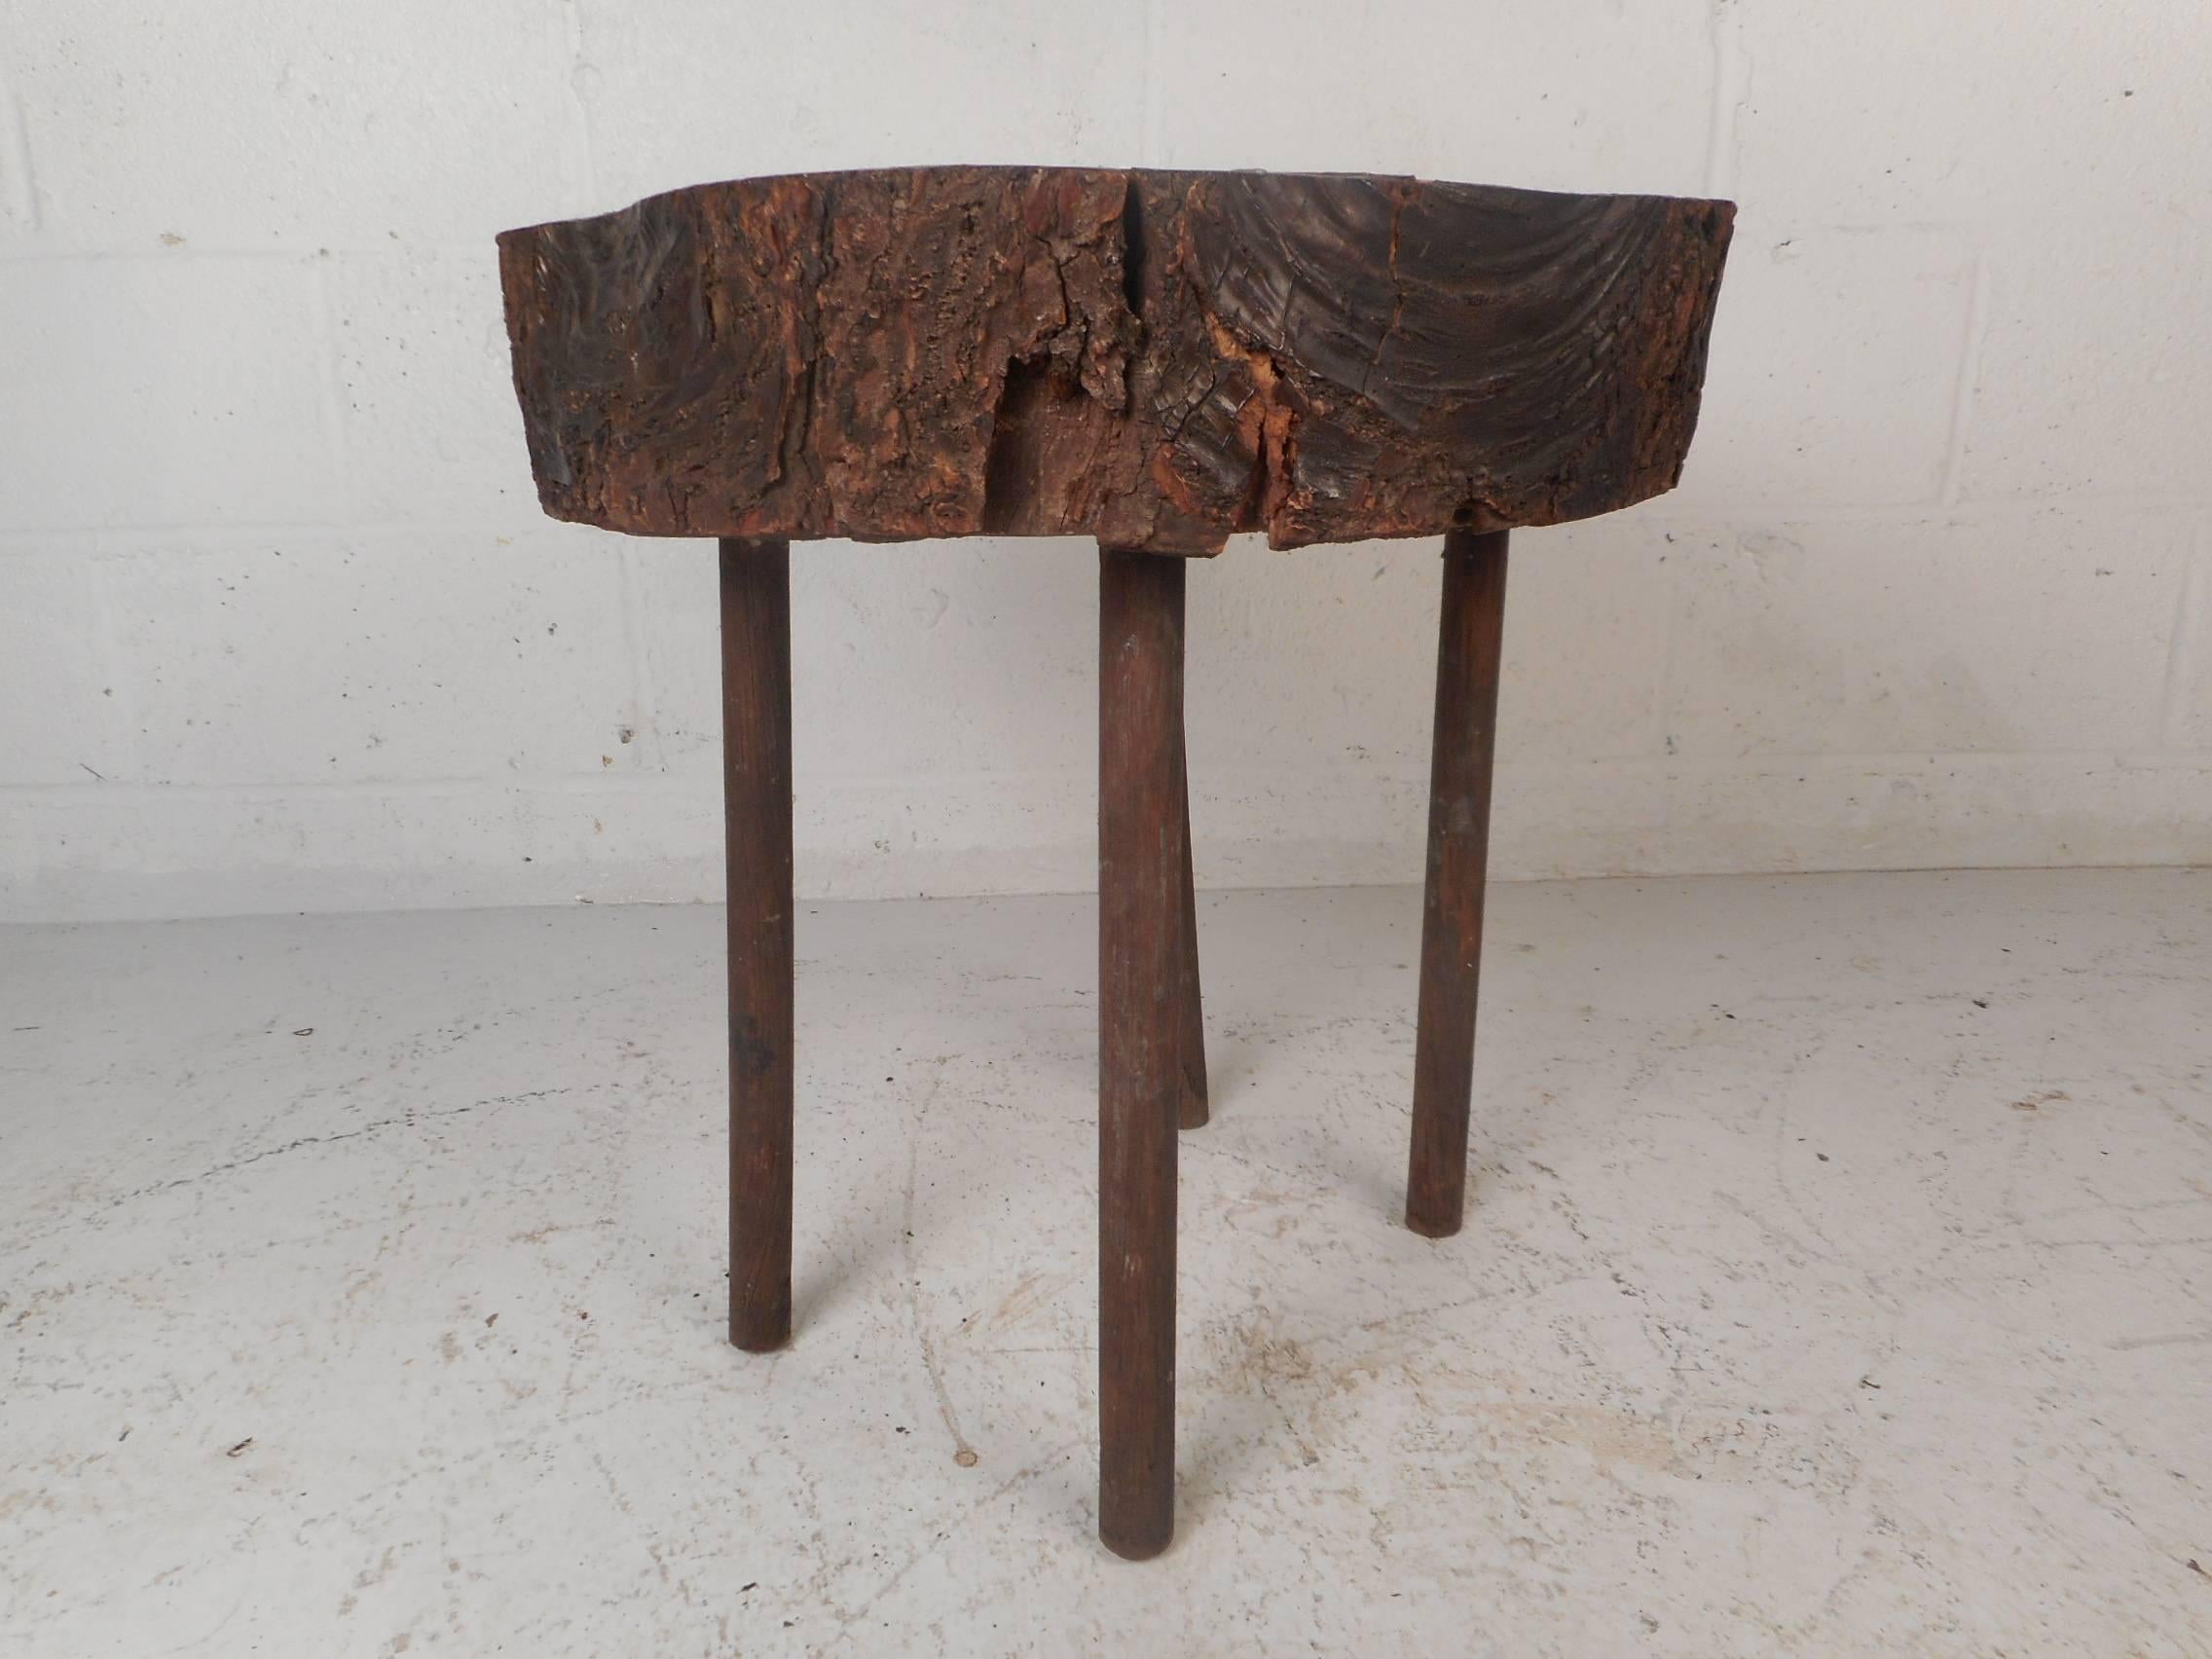 This beautiful vintage modern end table features a live edge tree slab top. Stylish design with four cylindrical wood legs and a lacquered free-form wood top. Quality craftsmanship makes this mid-century side table the perfect addition to any modern